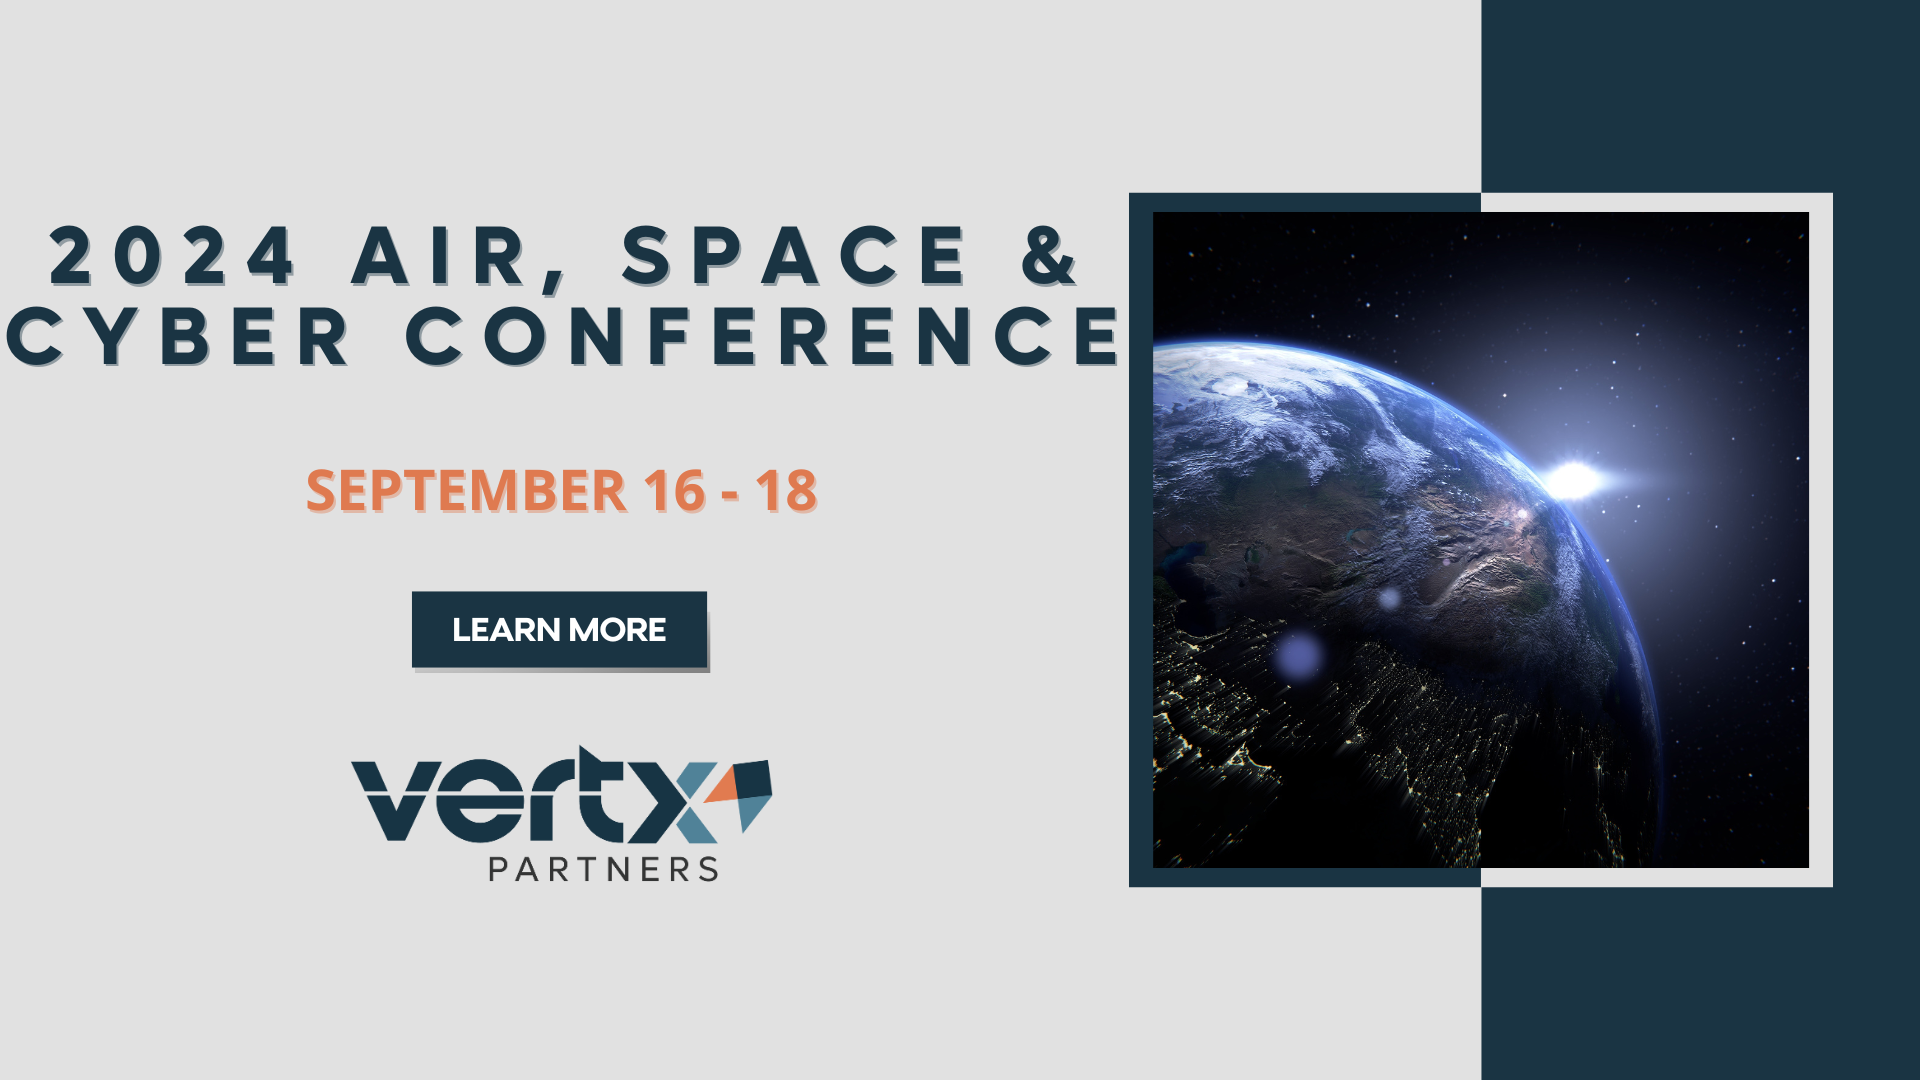 This graphic has the title 2024 Air, Space & Cyber Conference with the dates september 16 - 18 under it and a photo of earth in space with the sun behind it.